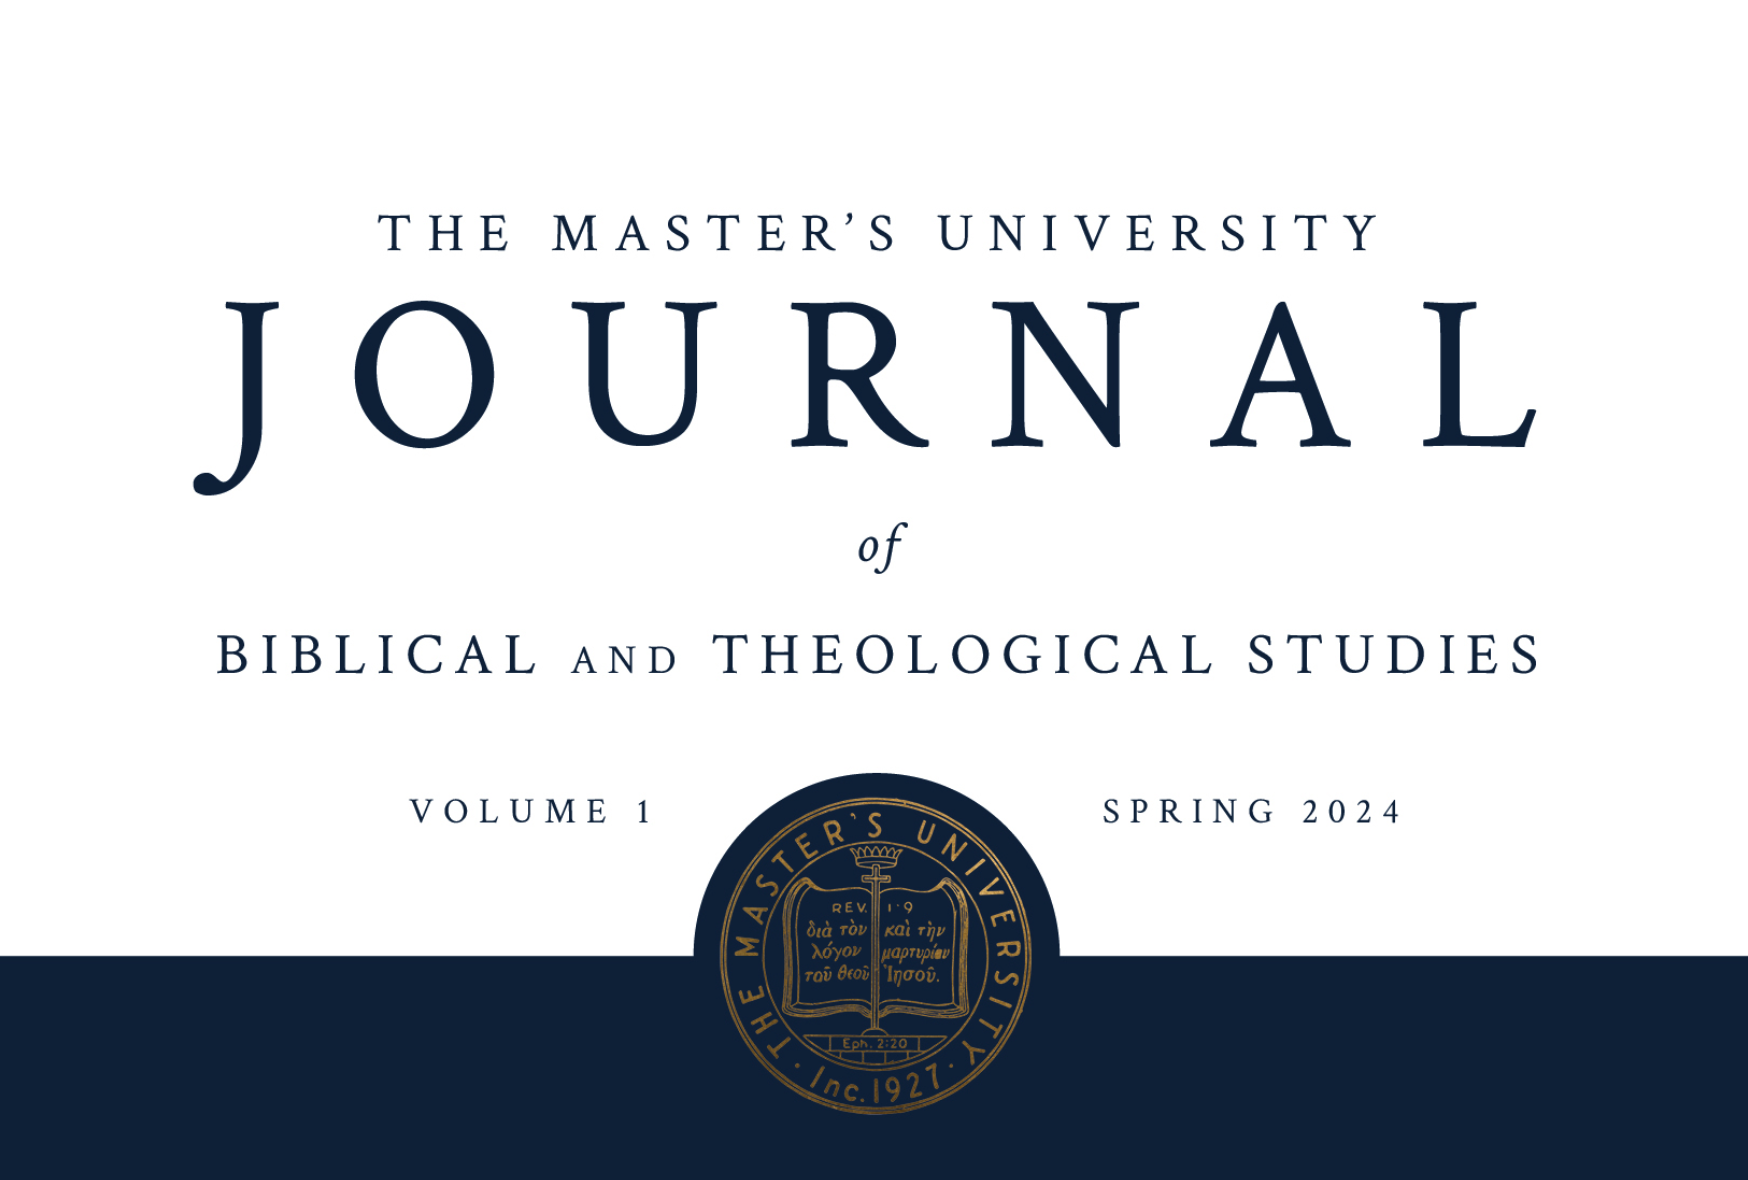 The Master's University Journal of Biblical and Theological Studies